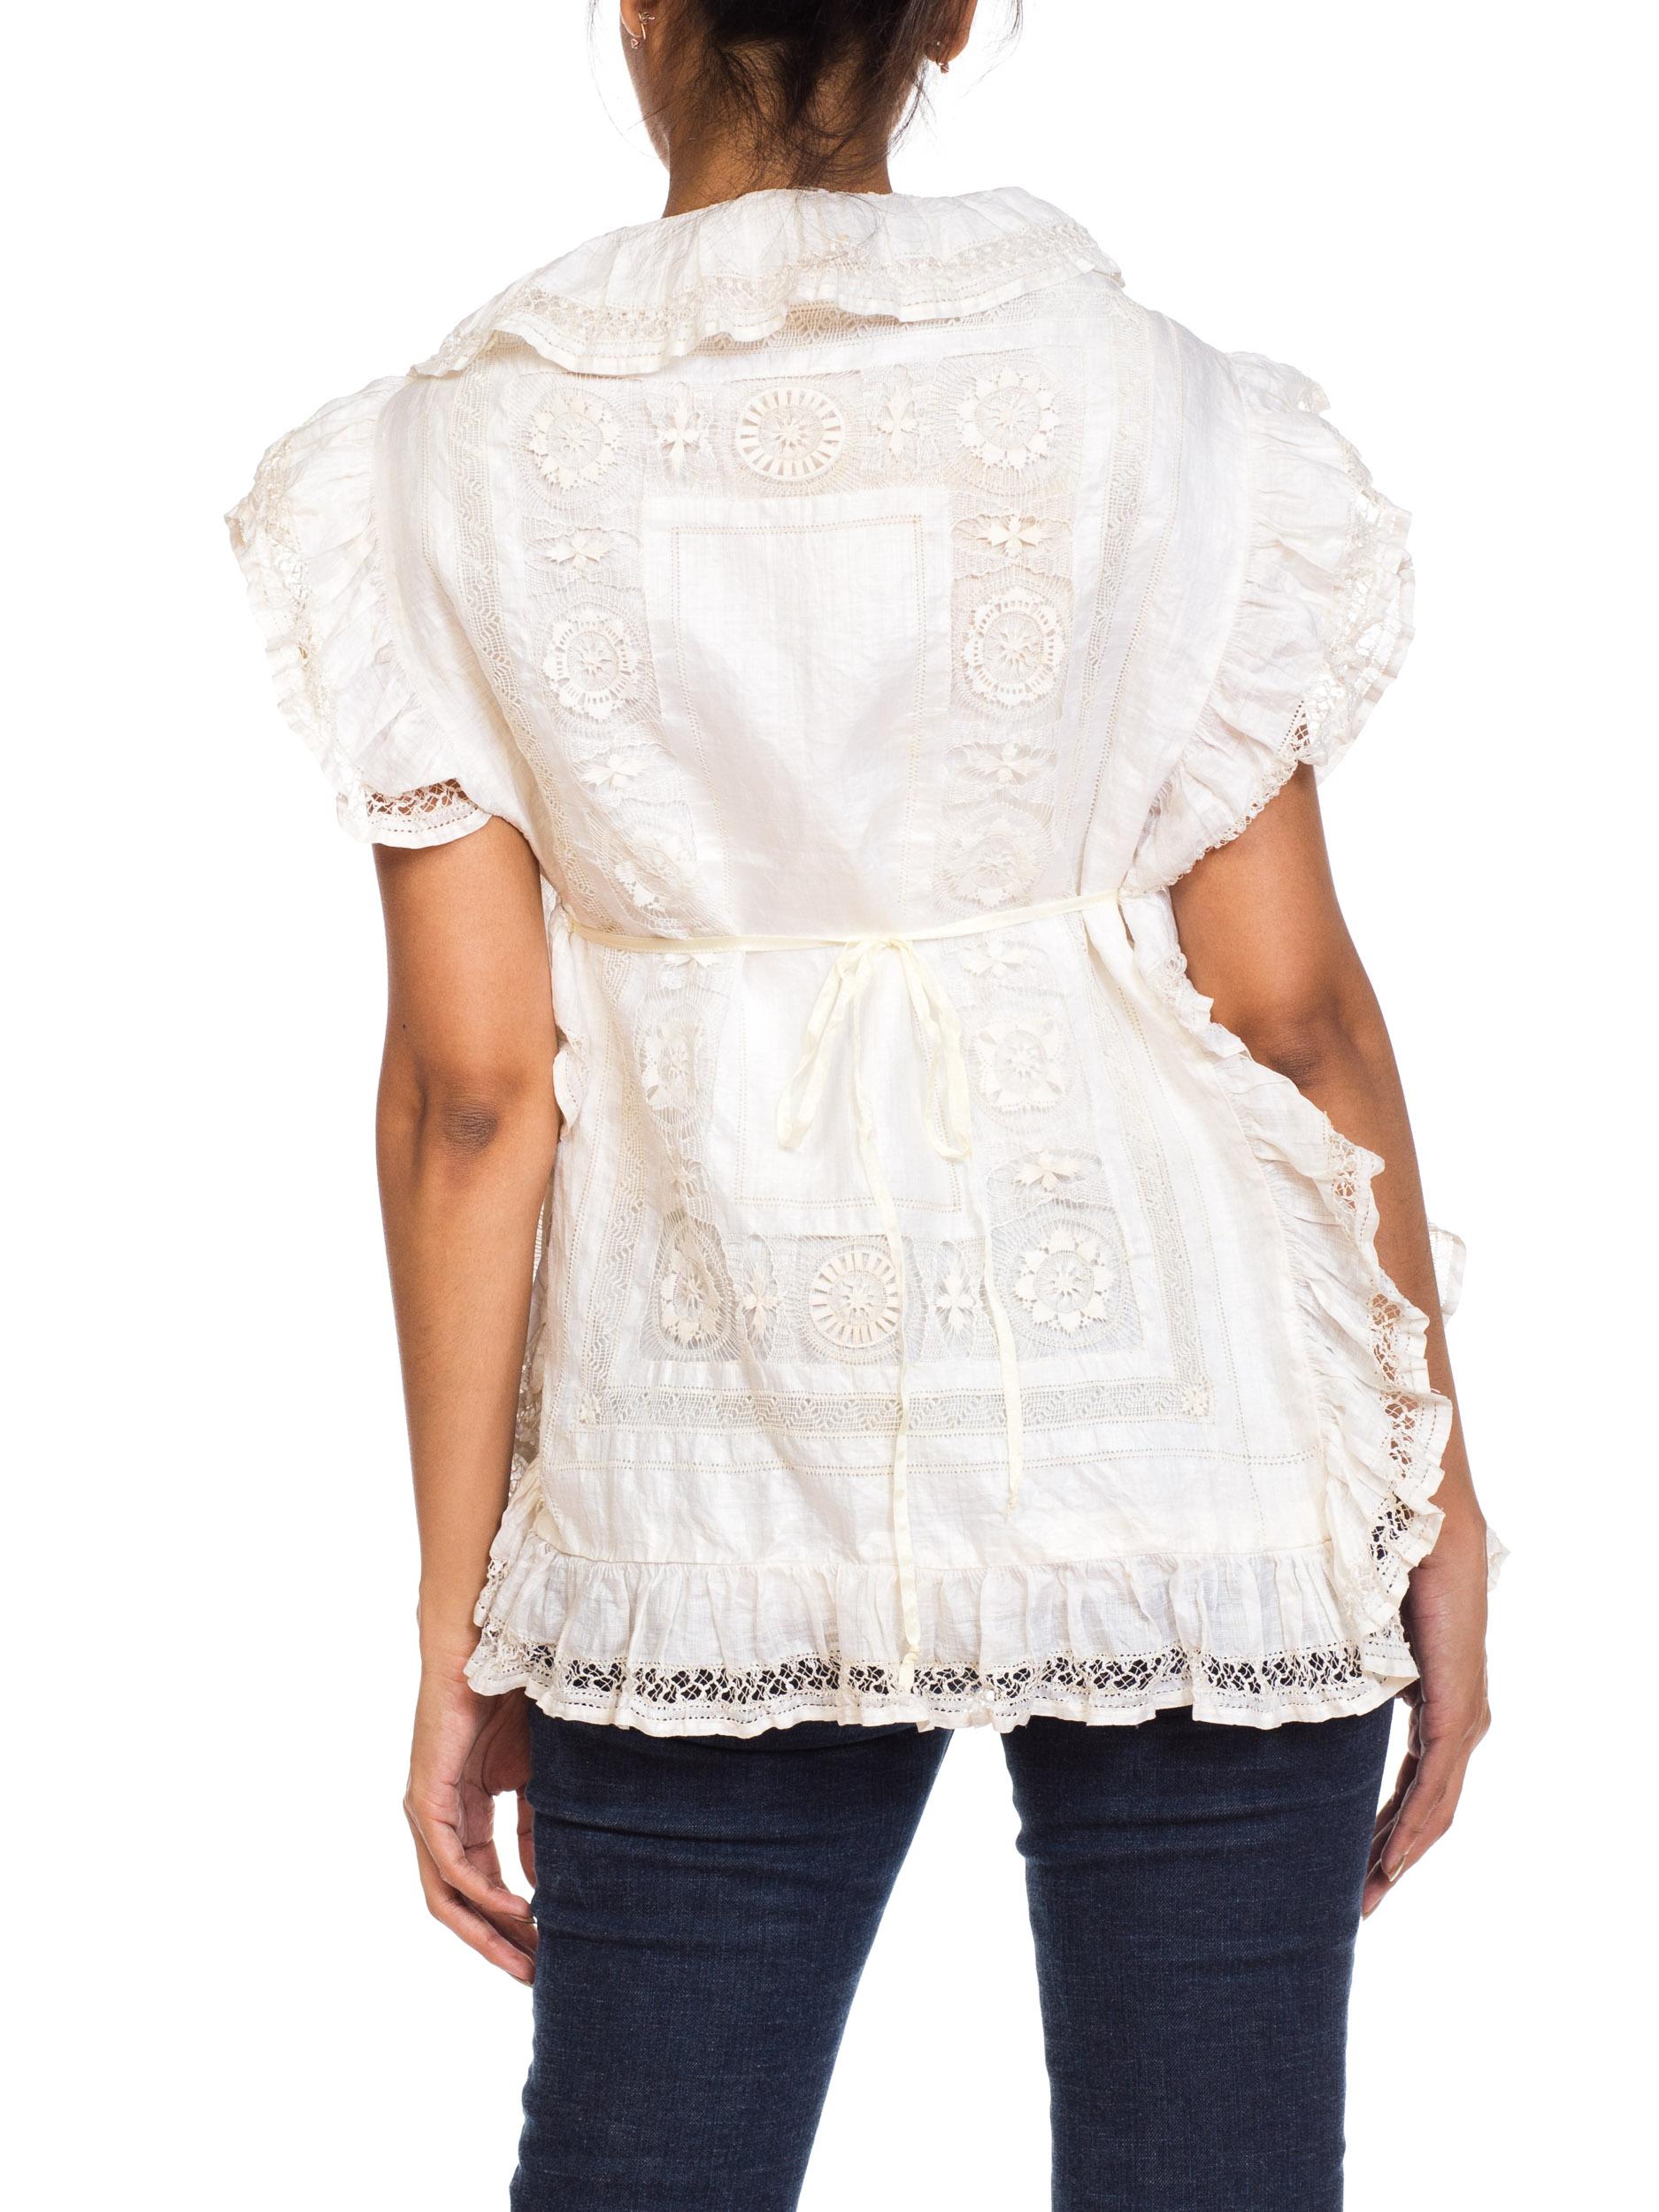 Handmade Lace & Linen Victorian Lace Top 1